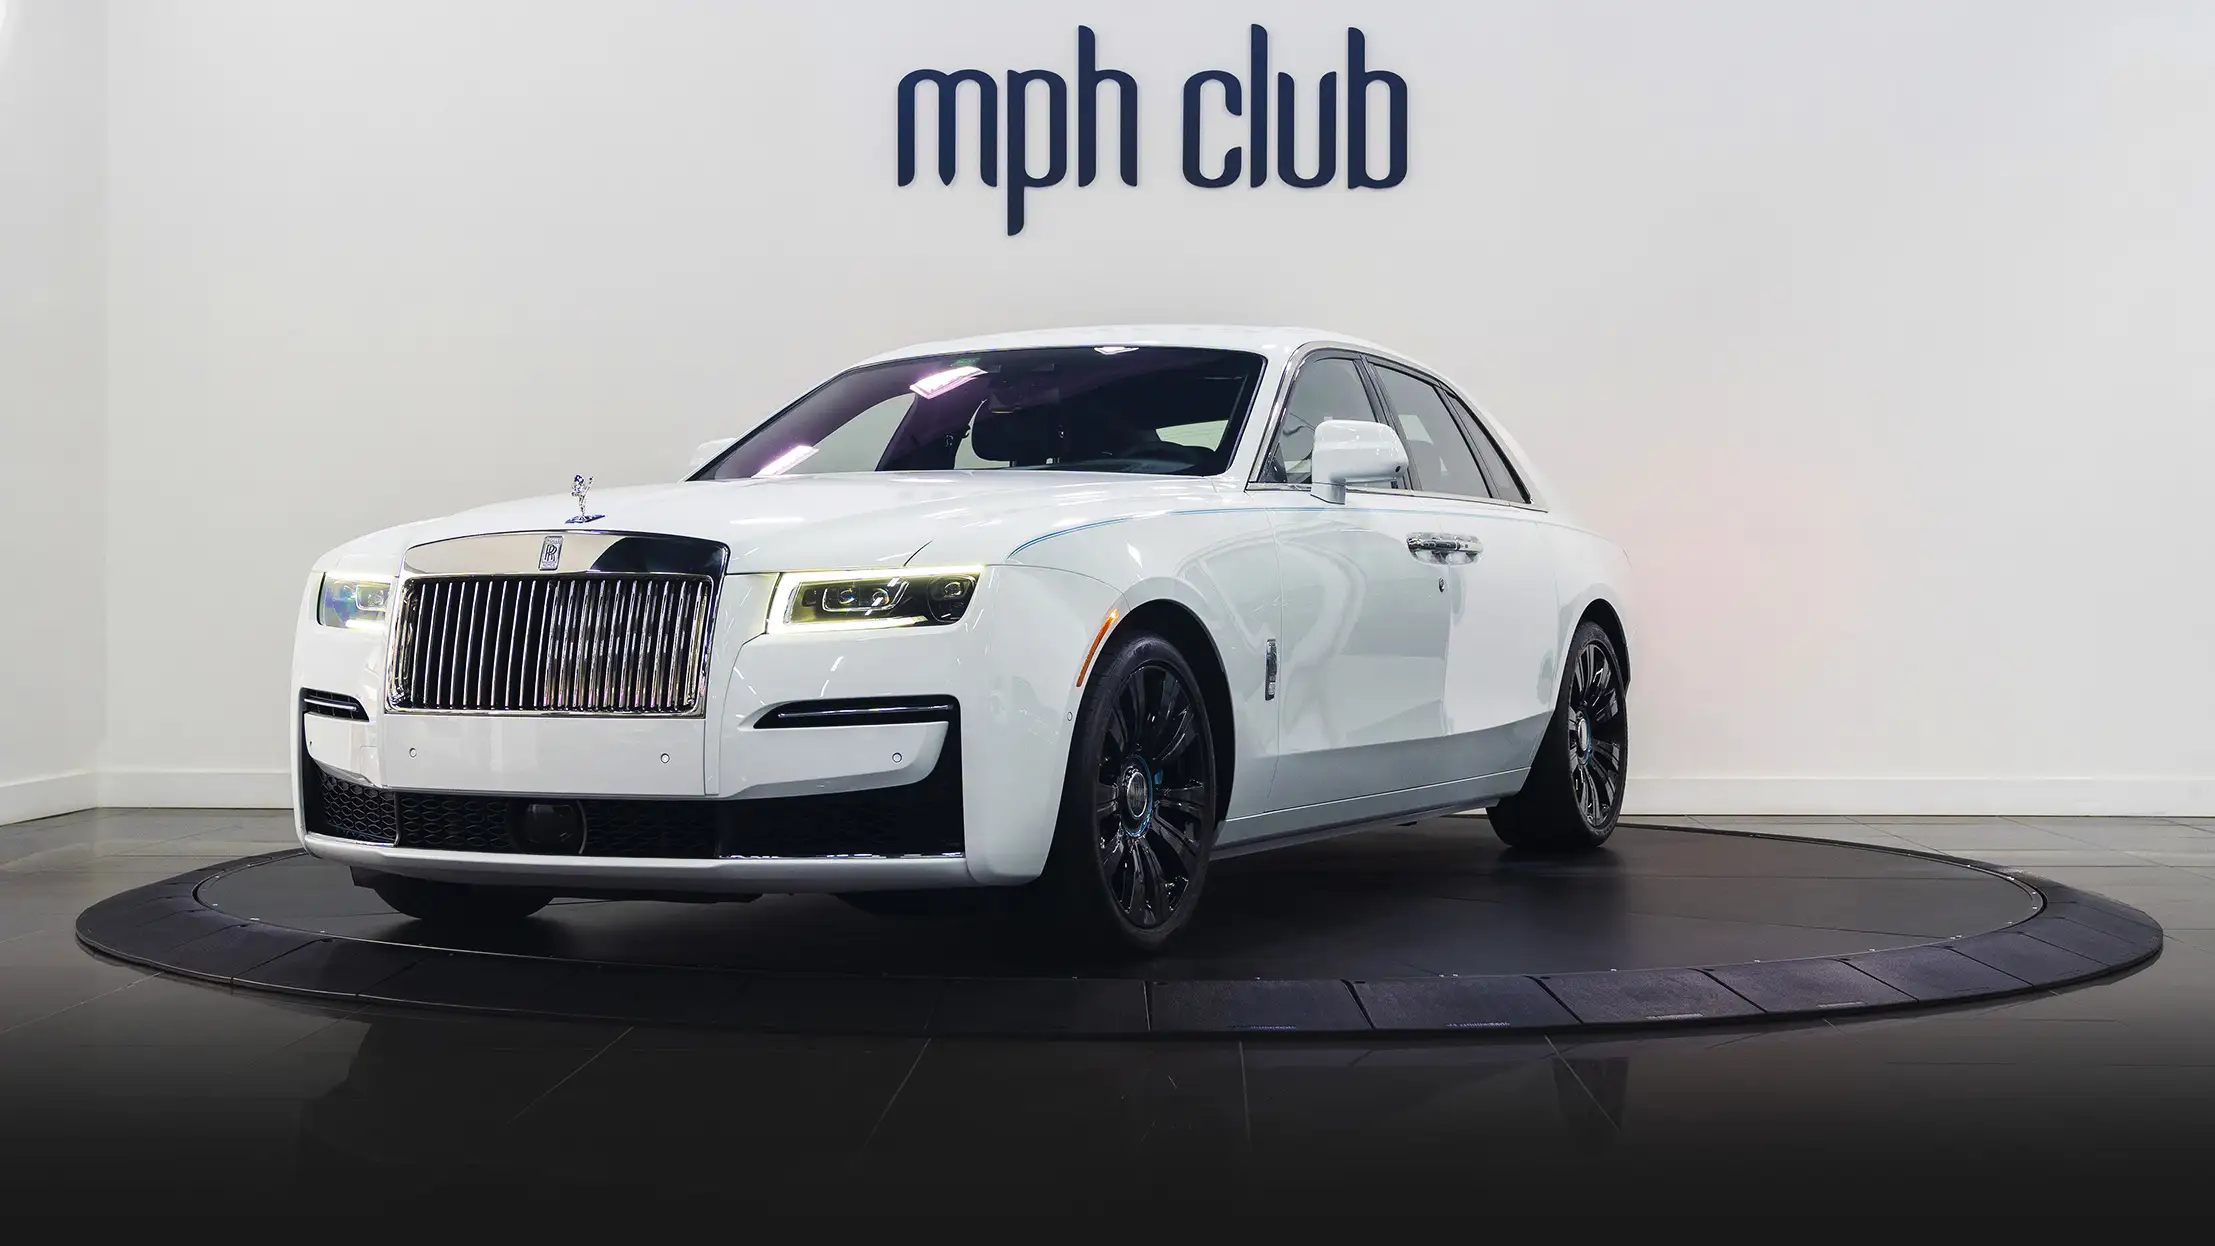 White on blue Rolls Royce Ghost profile view rental mph club